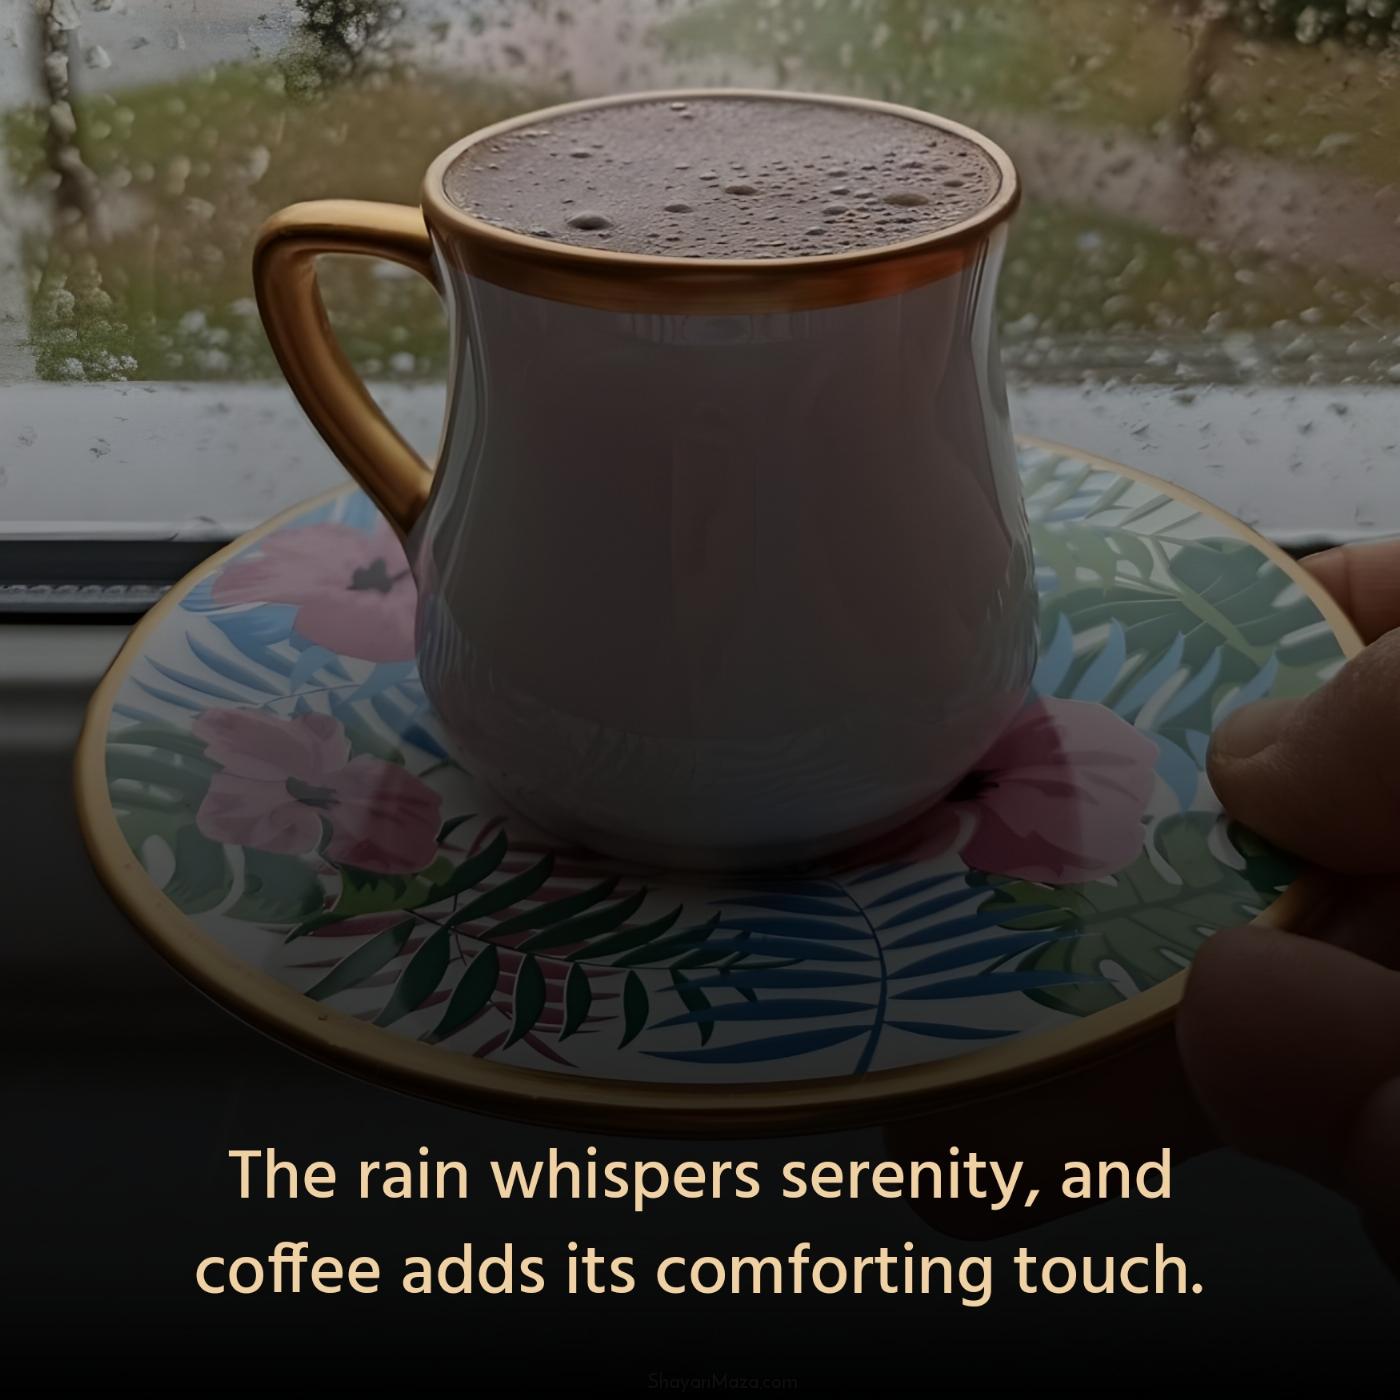 The rain whispers serenity and coffee adds its comforting touch